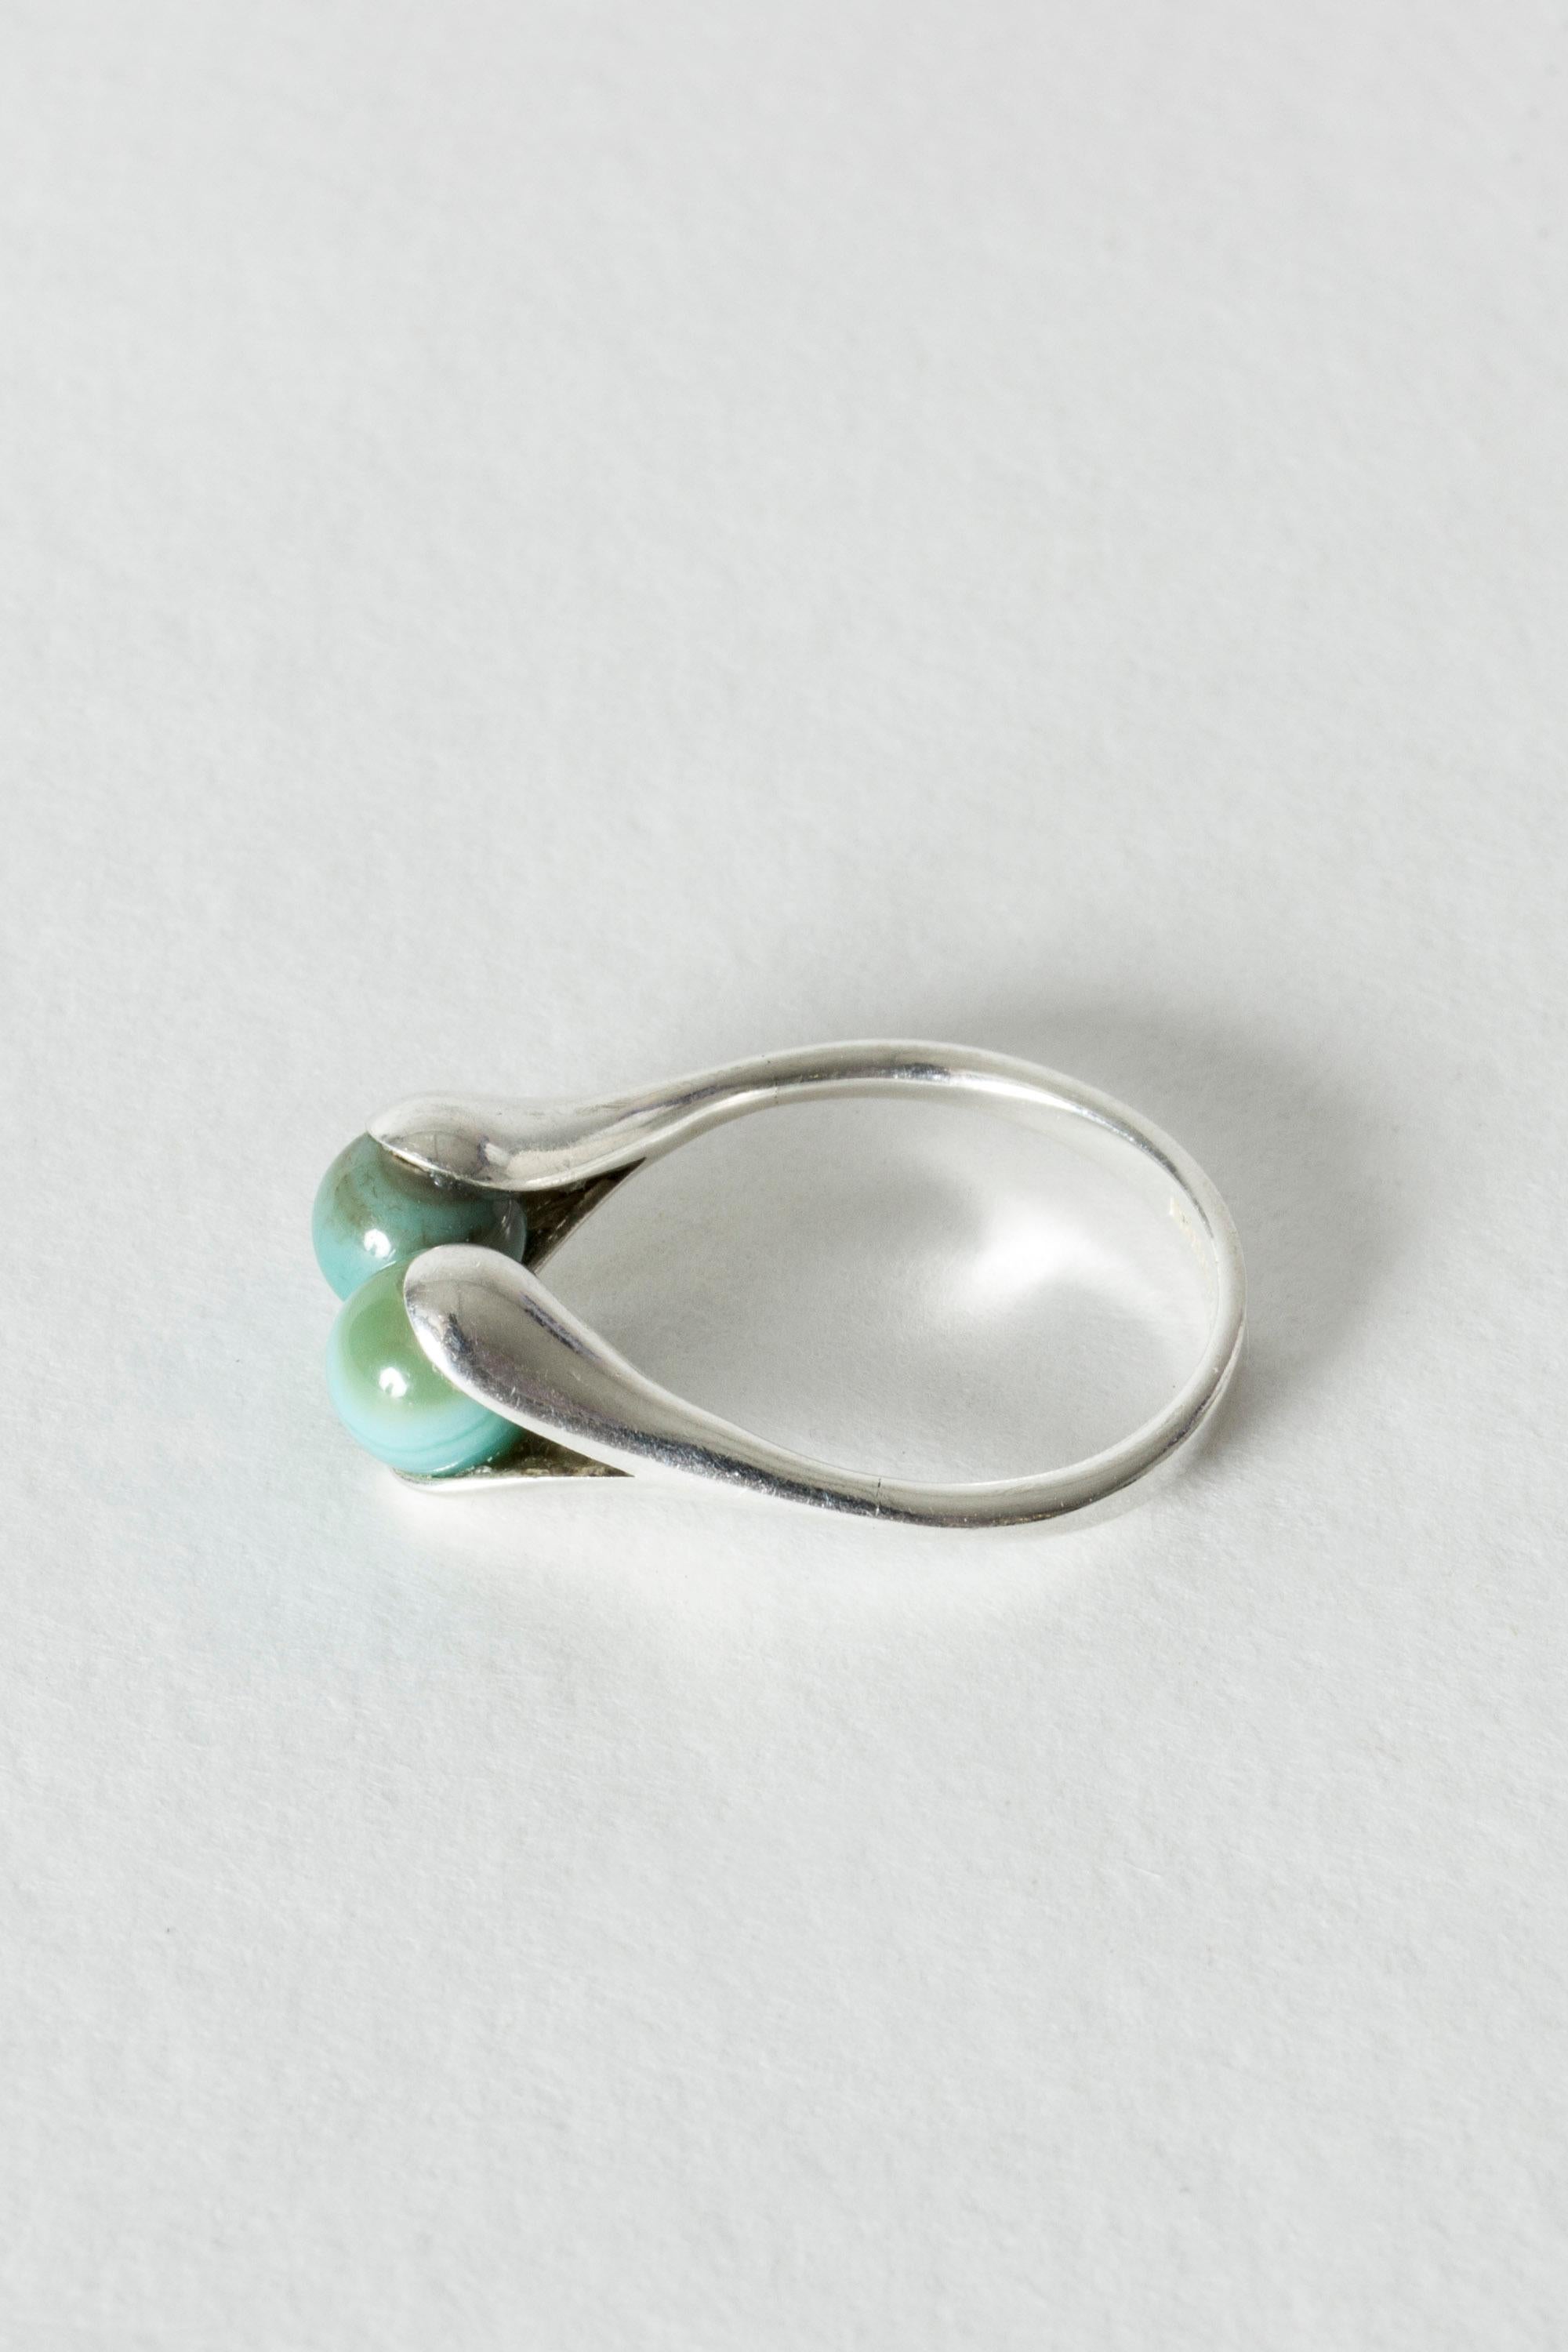 Ball Cut Silver and Banded Agate Ring by Elis Kauppi for Kupittaan Kulta, Finland, 1960s